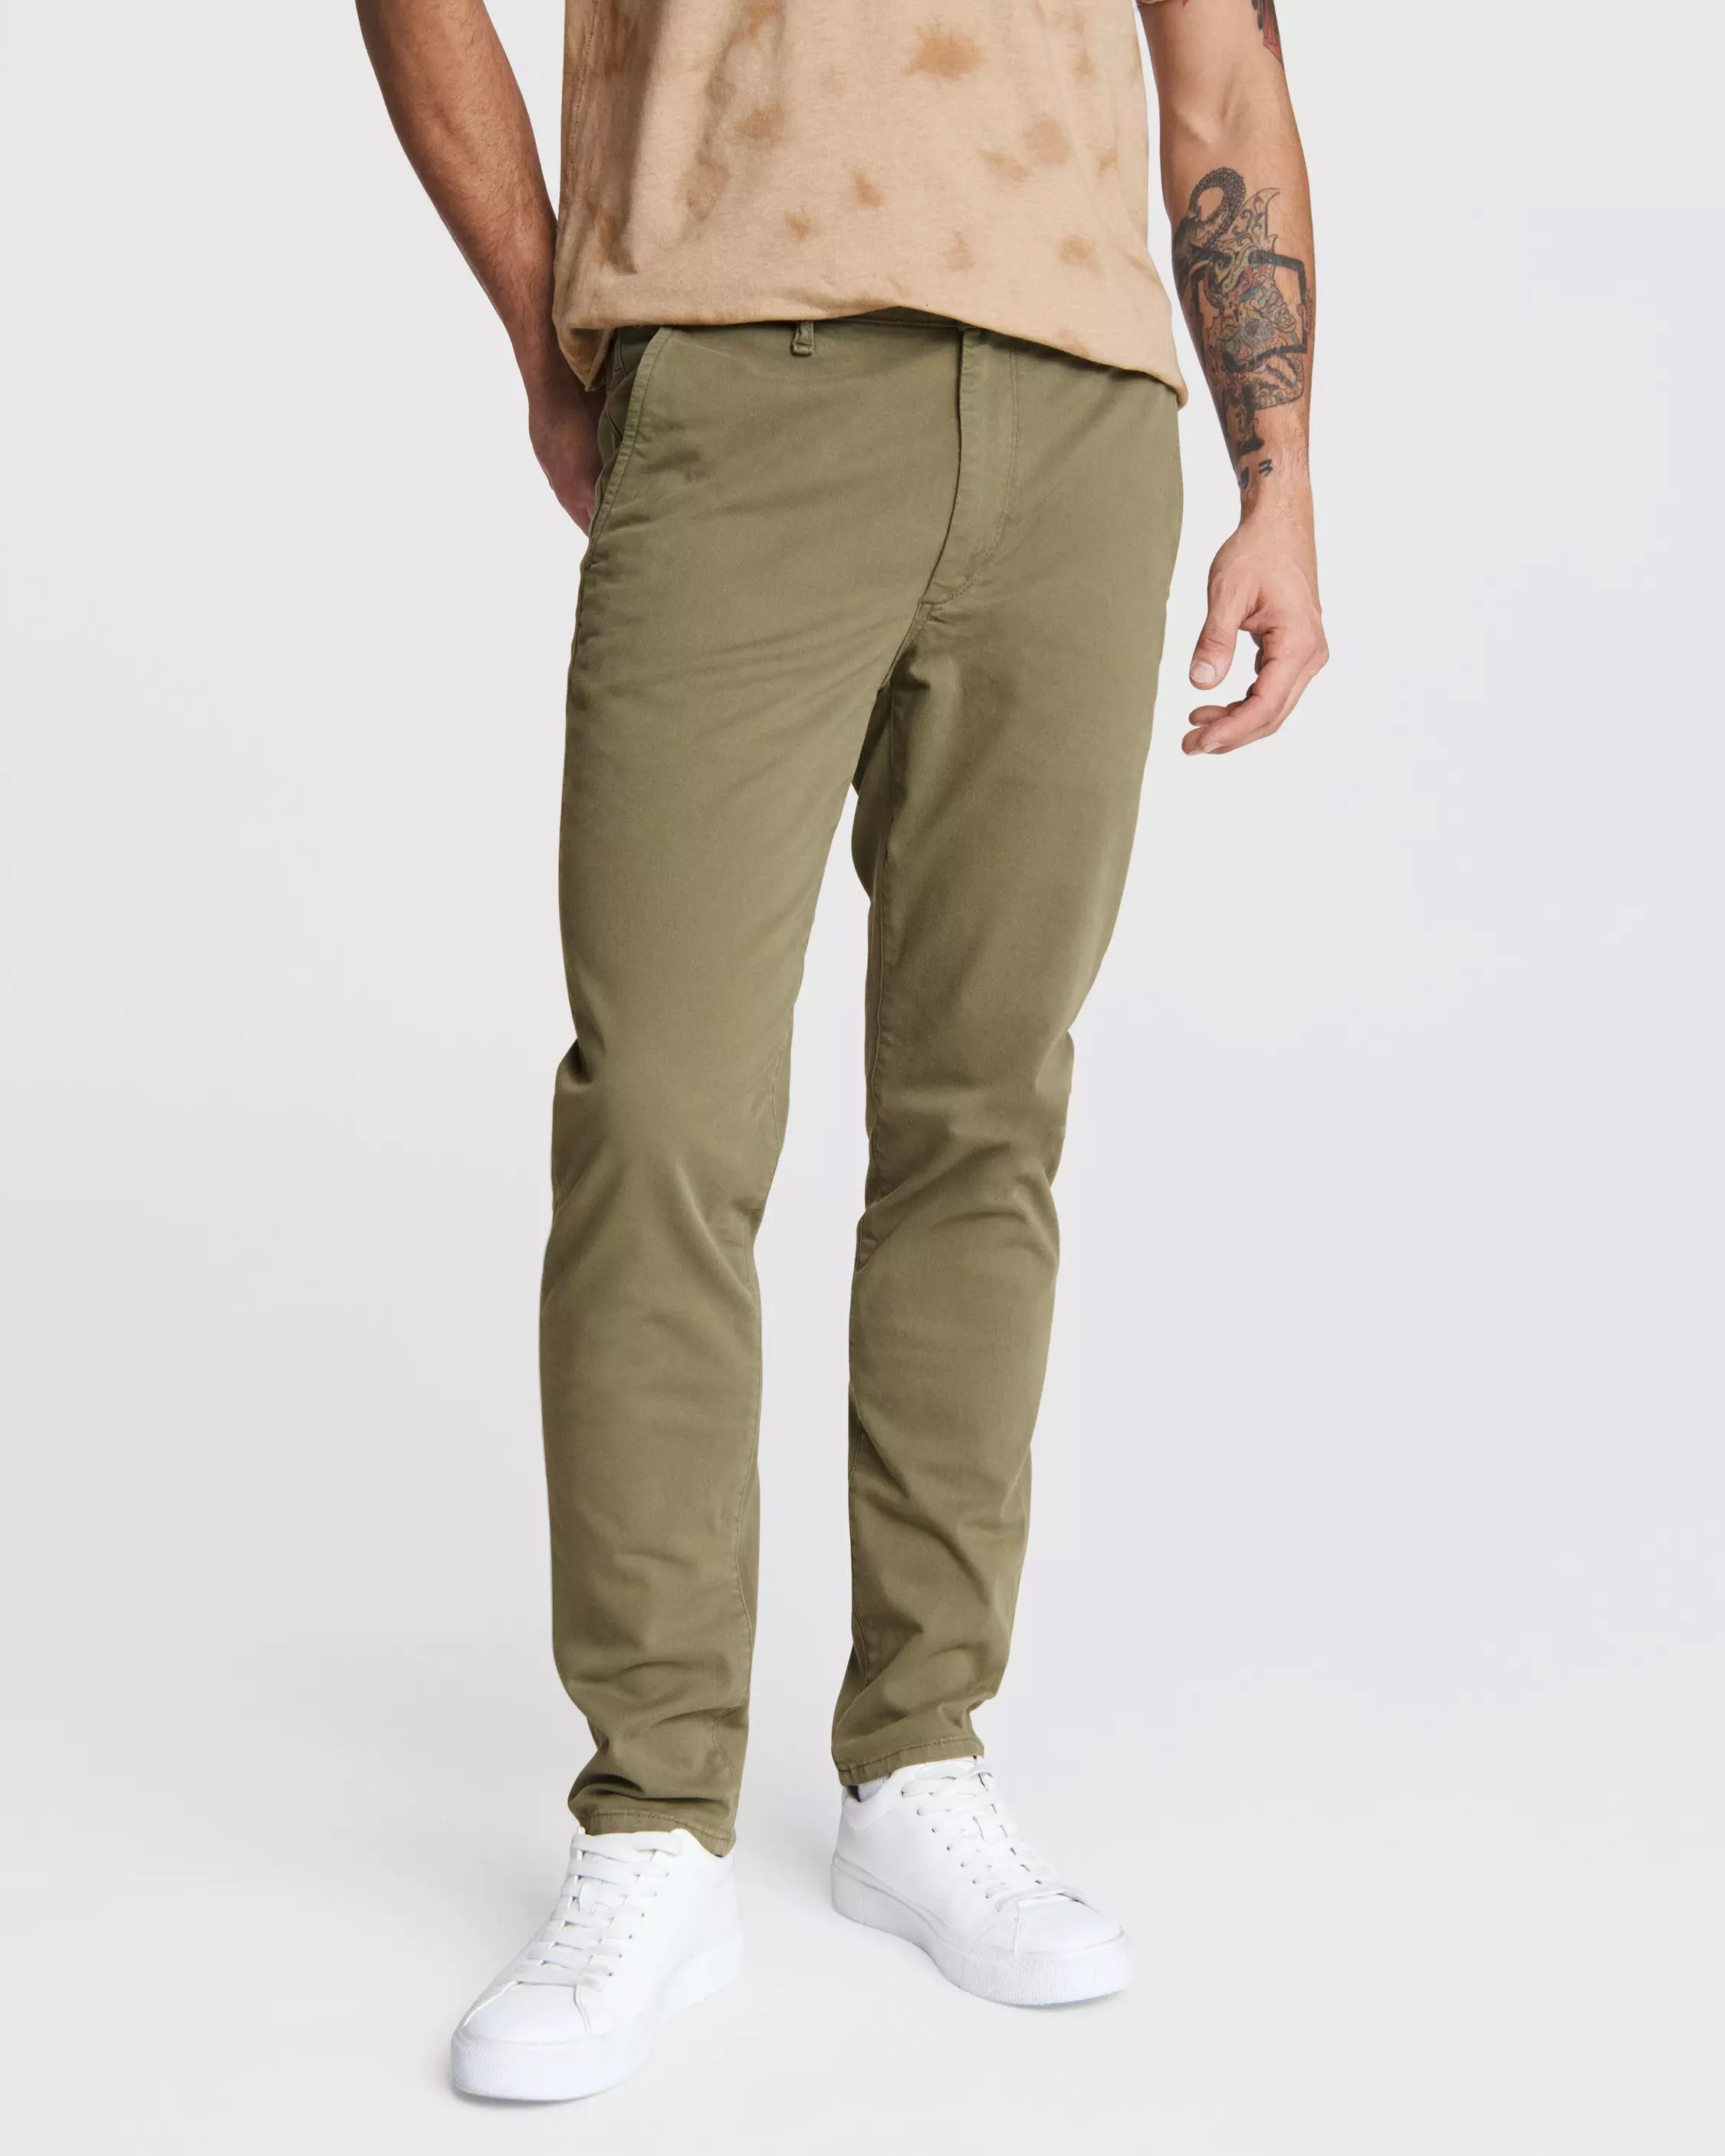 Essential Chino Pants - Green | Levi's® US